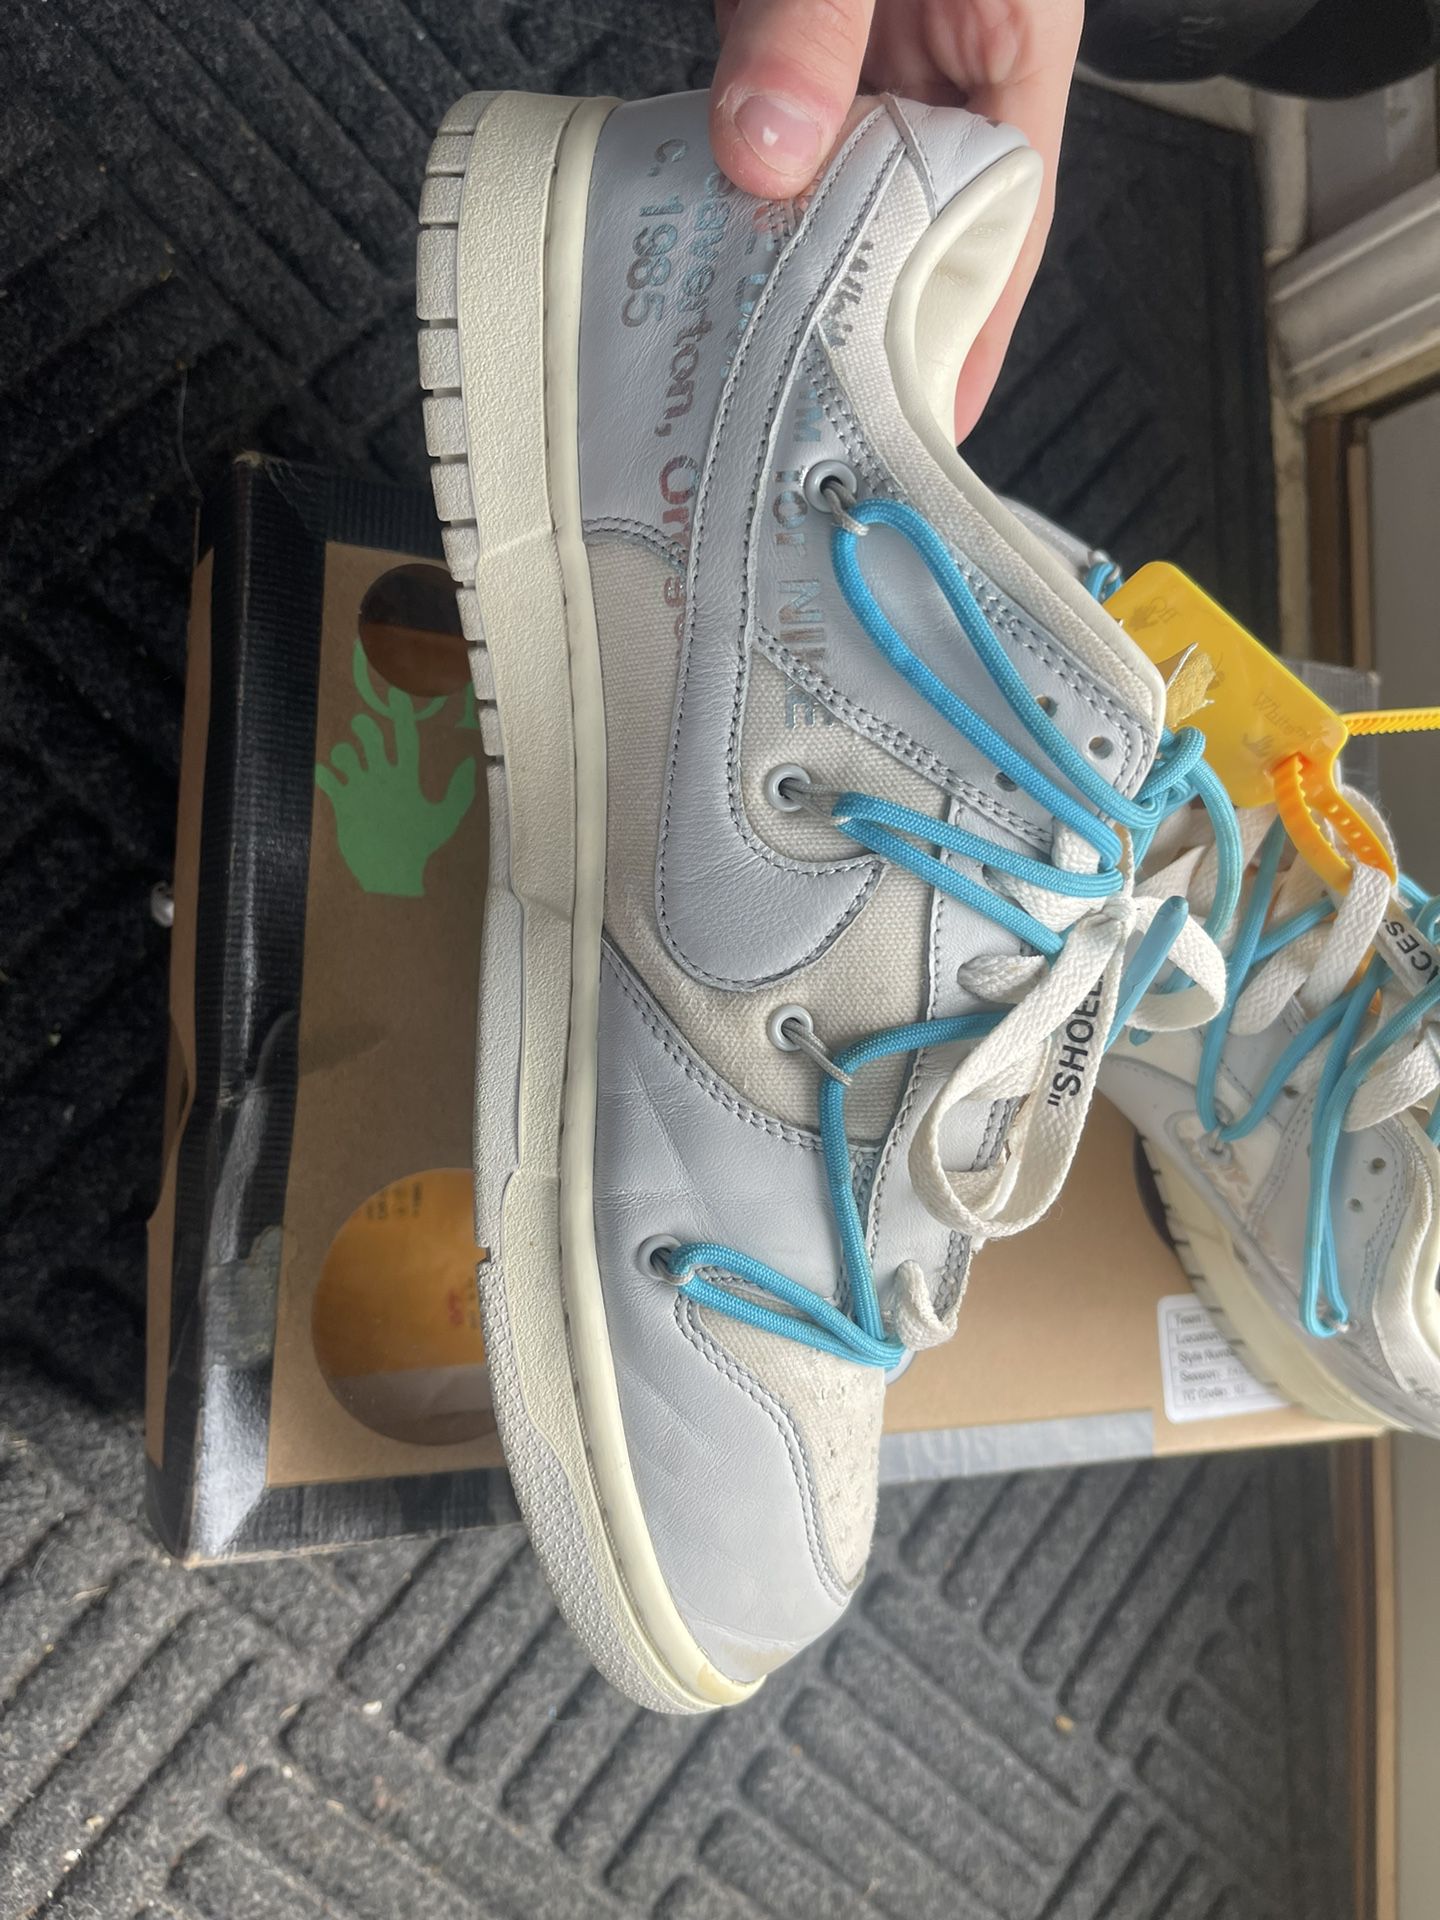 Nike Air Force 1 '07 Virgil x MoMa Off-White Size 10 Deadstock for Sale  in Austin, TX - OfferUp